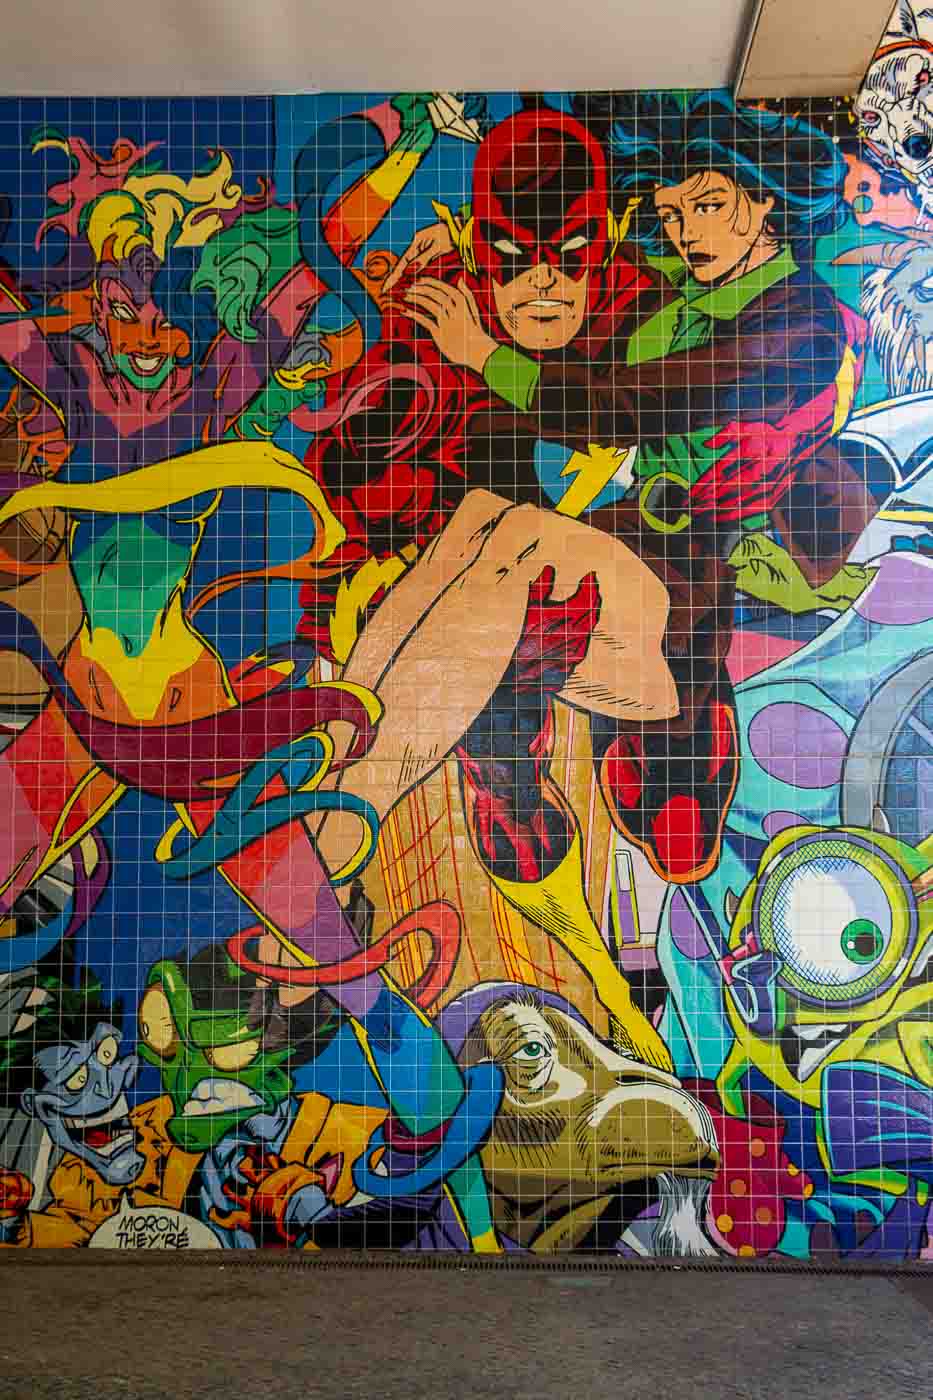 And for a pop-culture explosion, check out Erró's giant mural featuring comic book superheroes! It's a vibrant art piece that adds playful energy to the area. It was interesting to see a bizarre mixture of worlds in the same art piece. It might be the only mural where Superman meets the X-men, and this is not even the most unusual part.